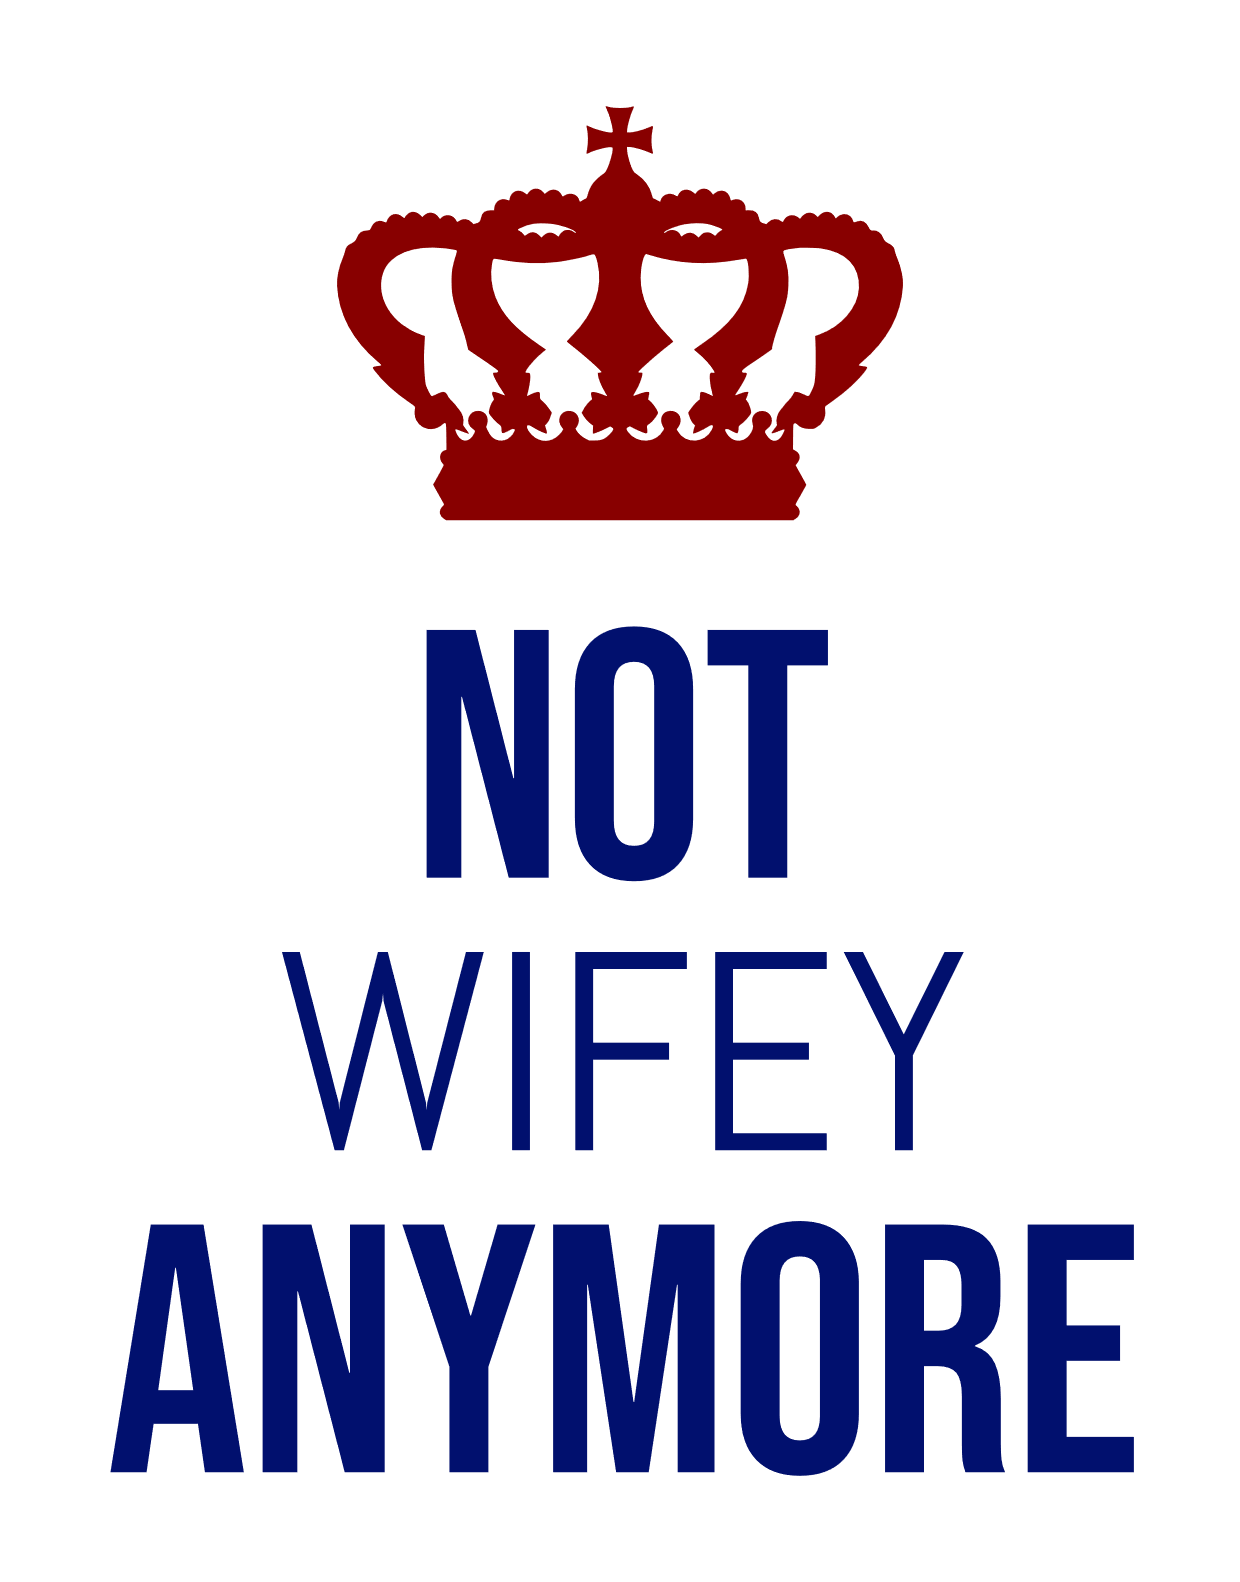 Finally divorced? Not wifey anymore svg